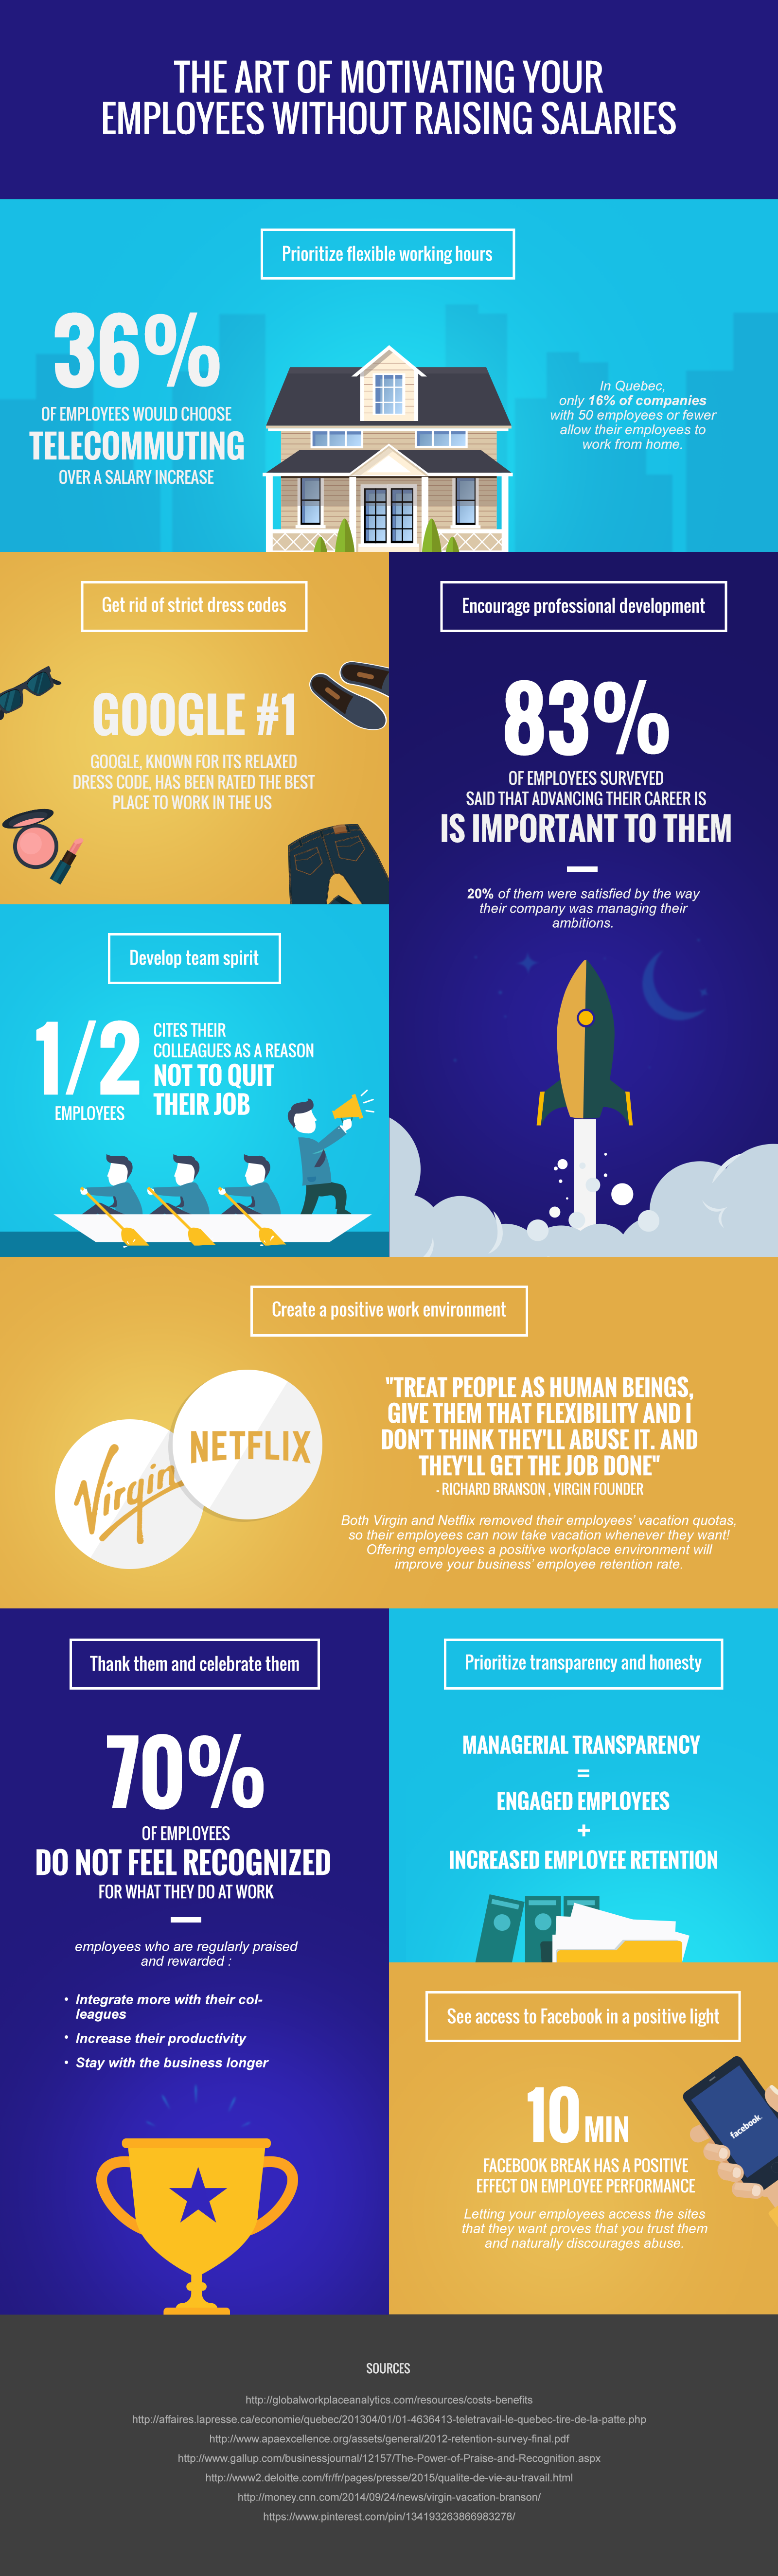 How to Motivate Employees Without Raising Salaries - Infographic